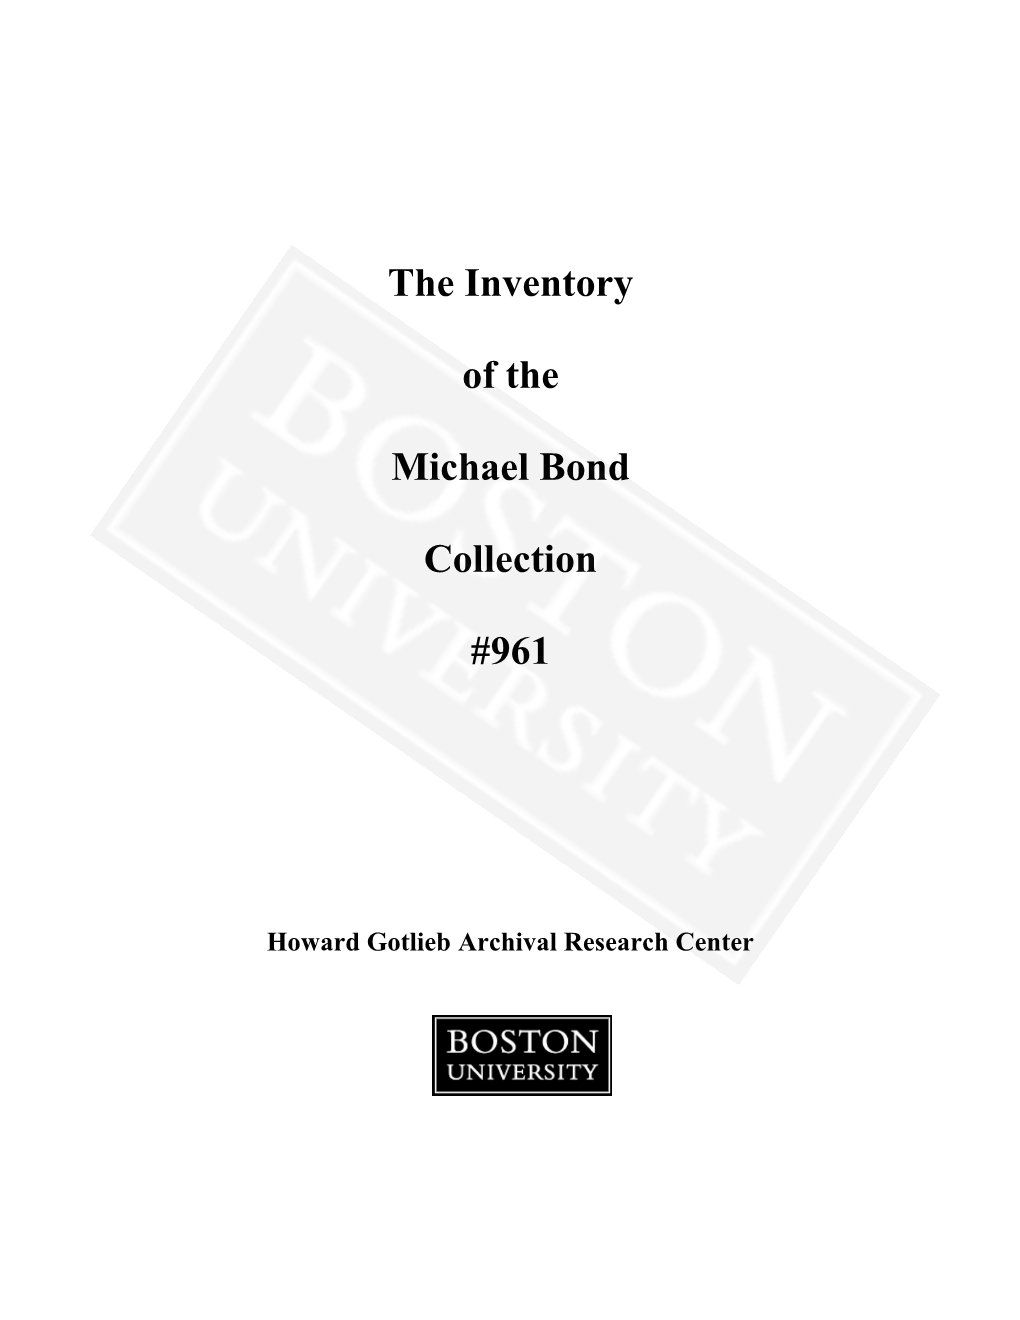 The Inventory of the Michael Bond Collection #961